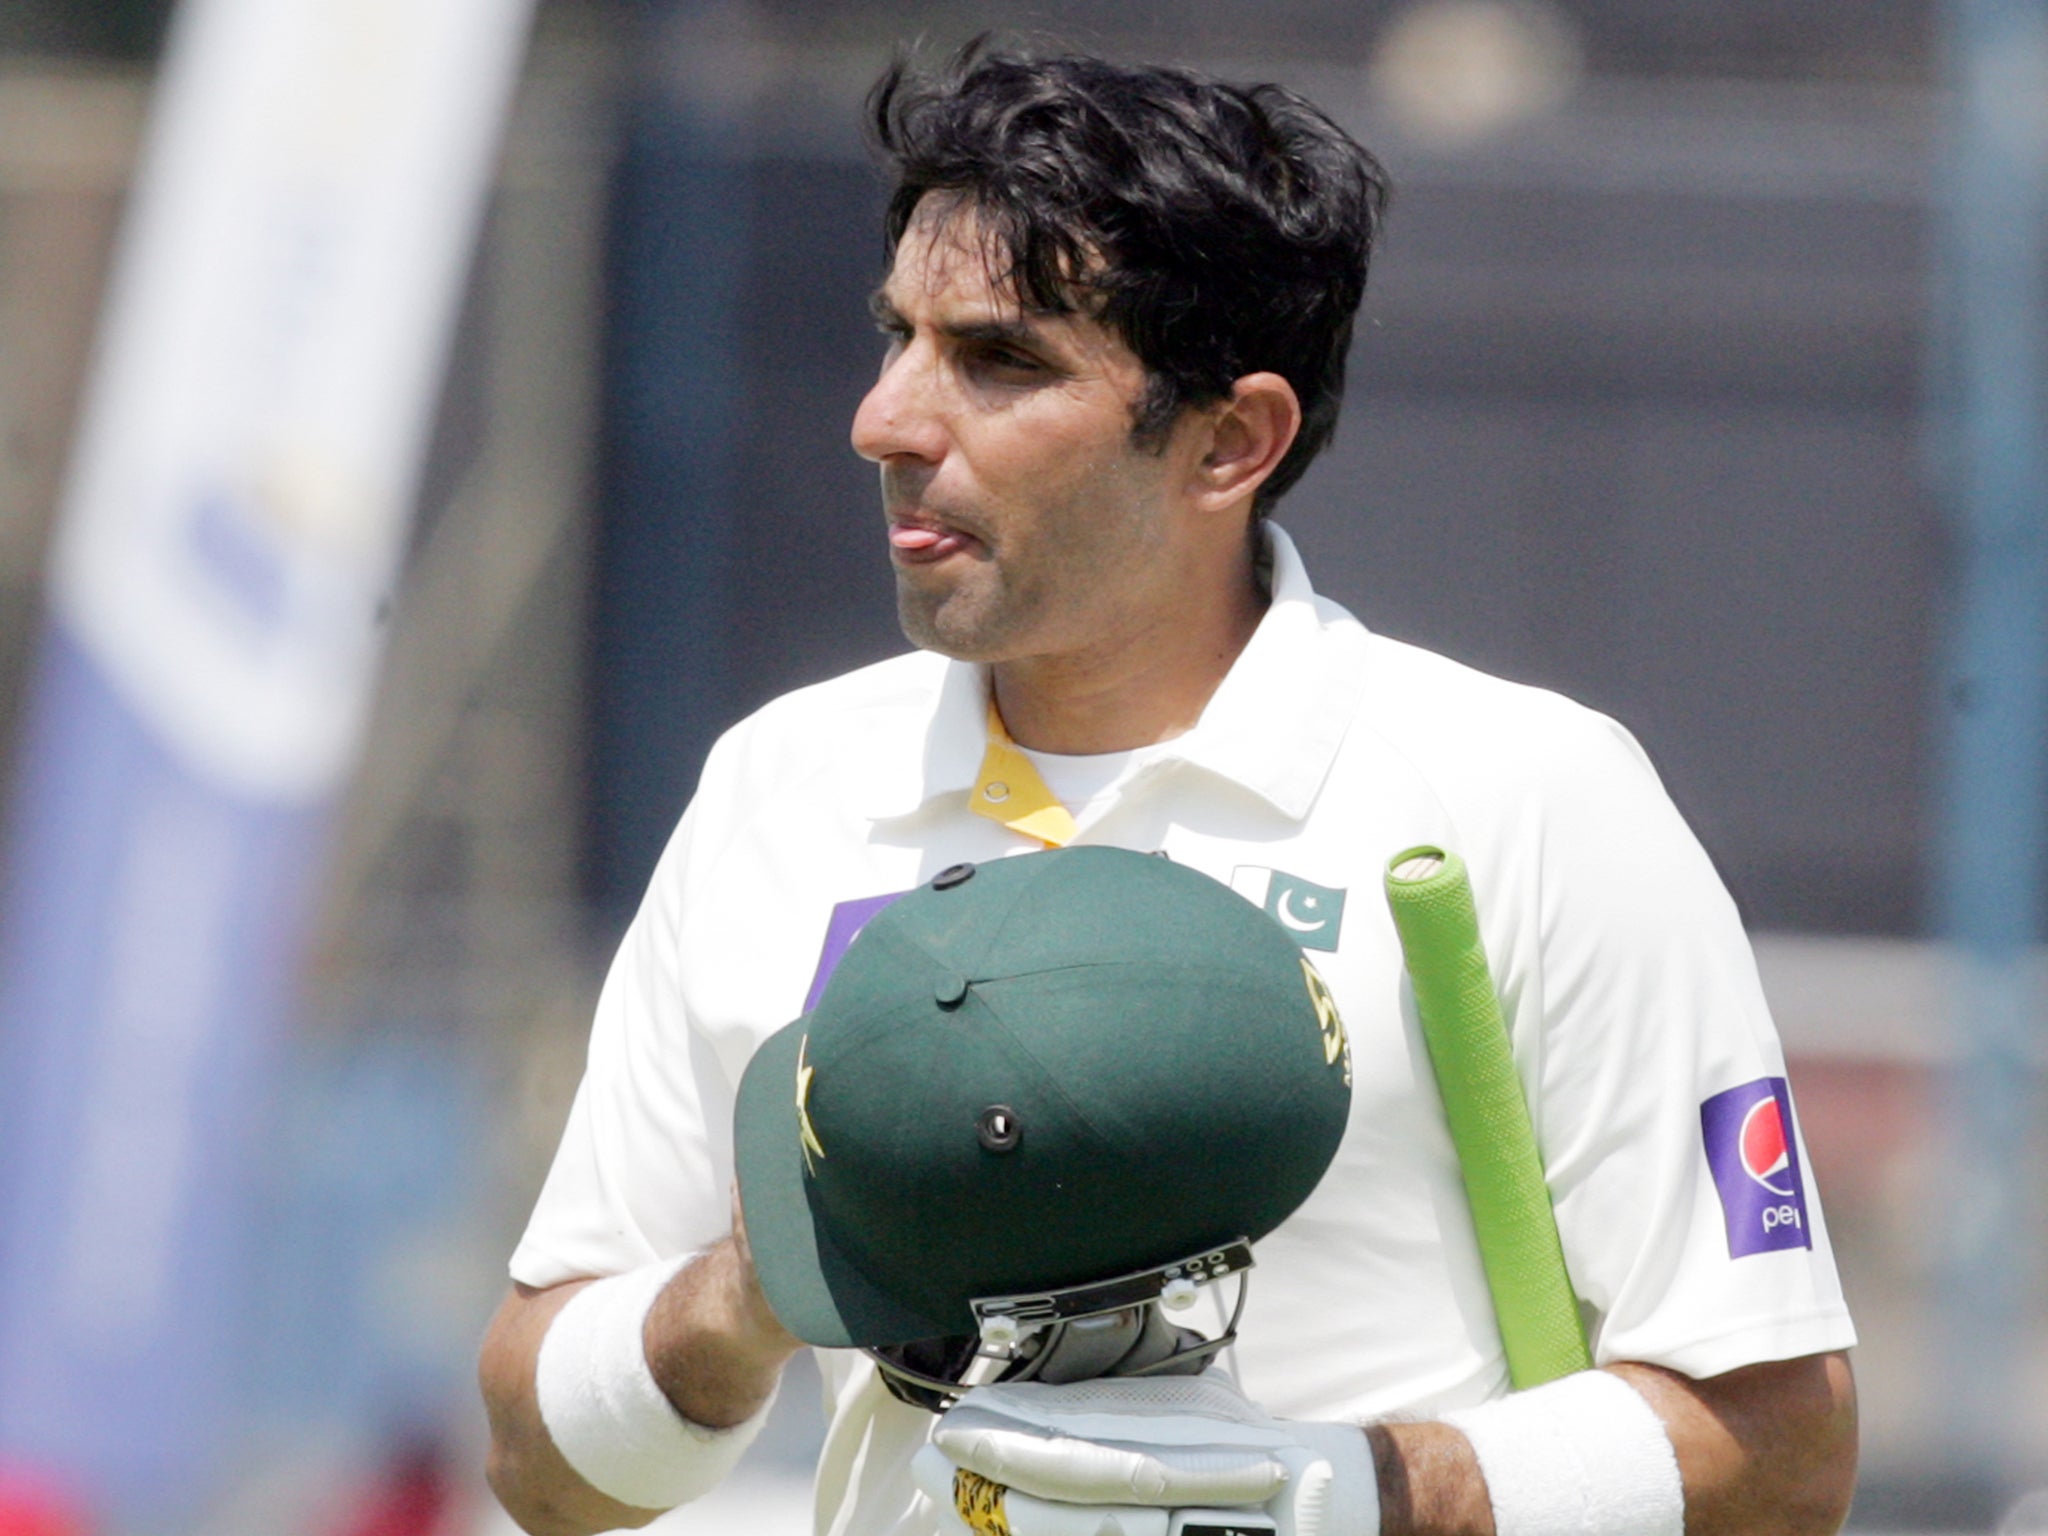 Misbah ul-Haq departs the field after his side lose to Zimbabwe